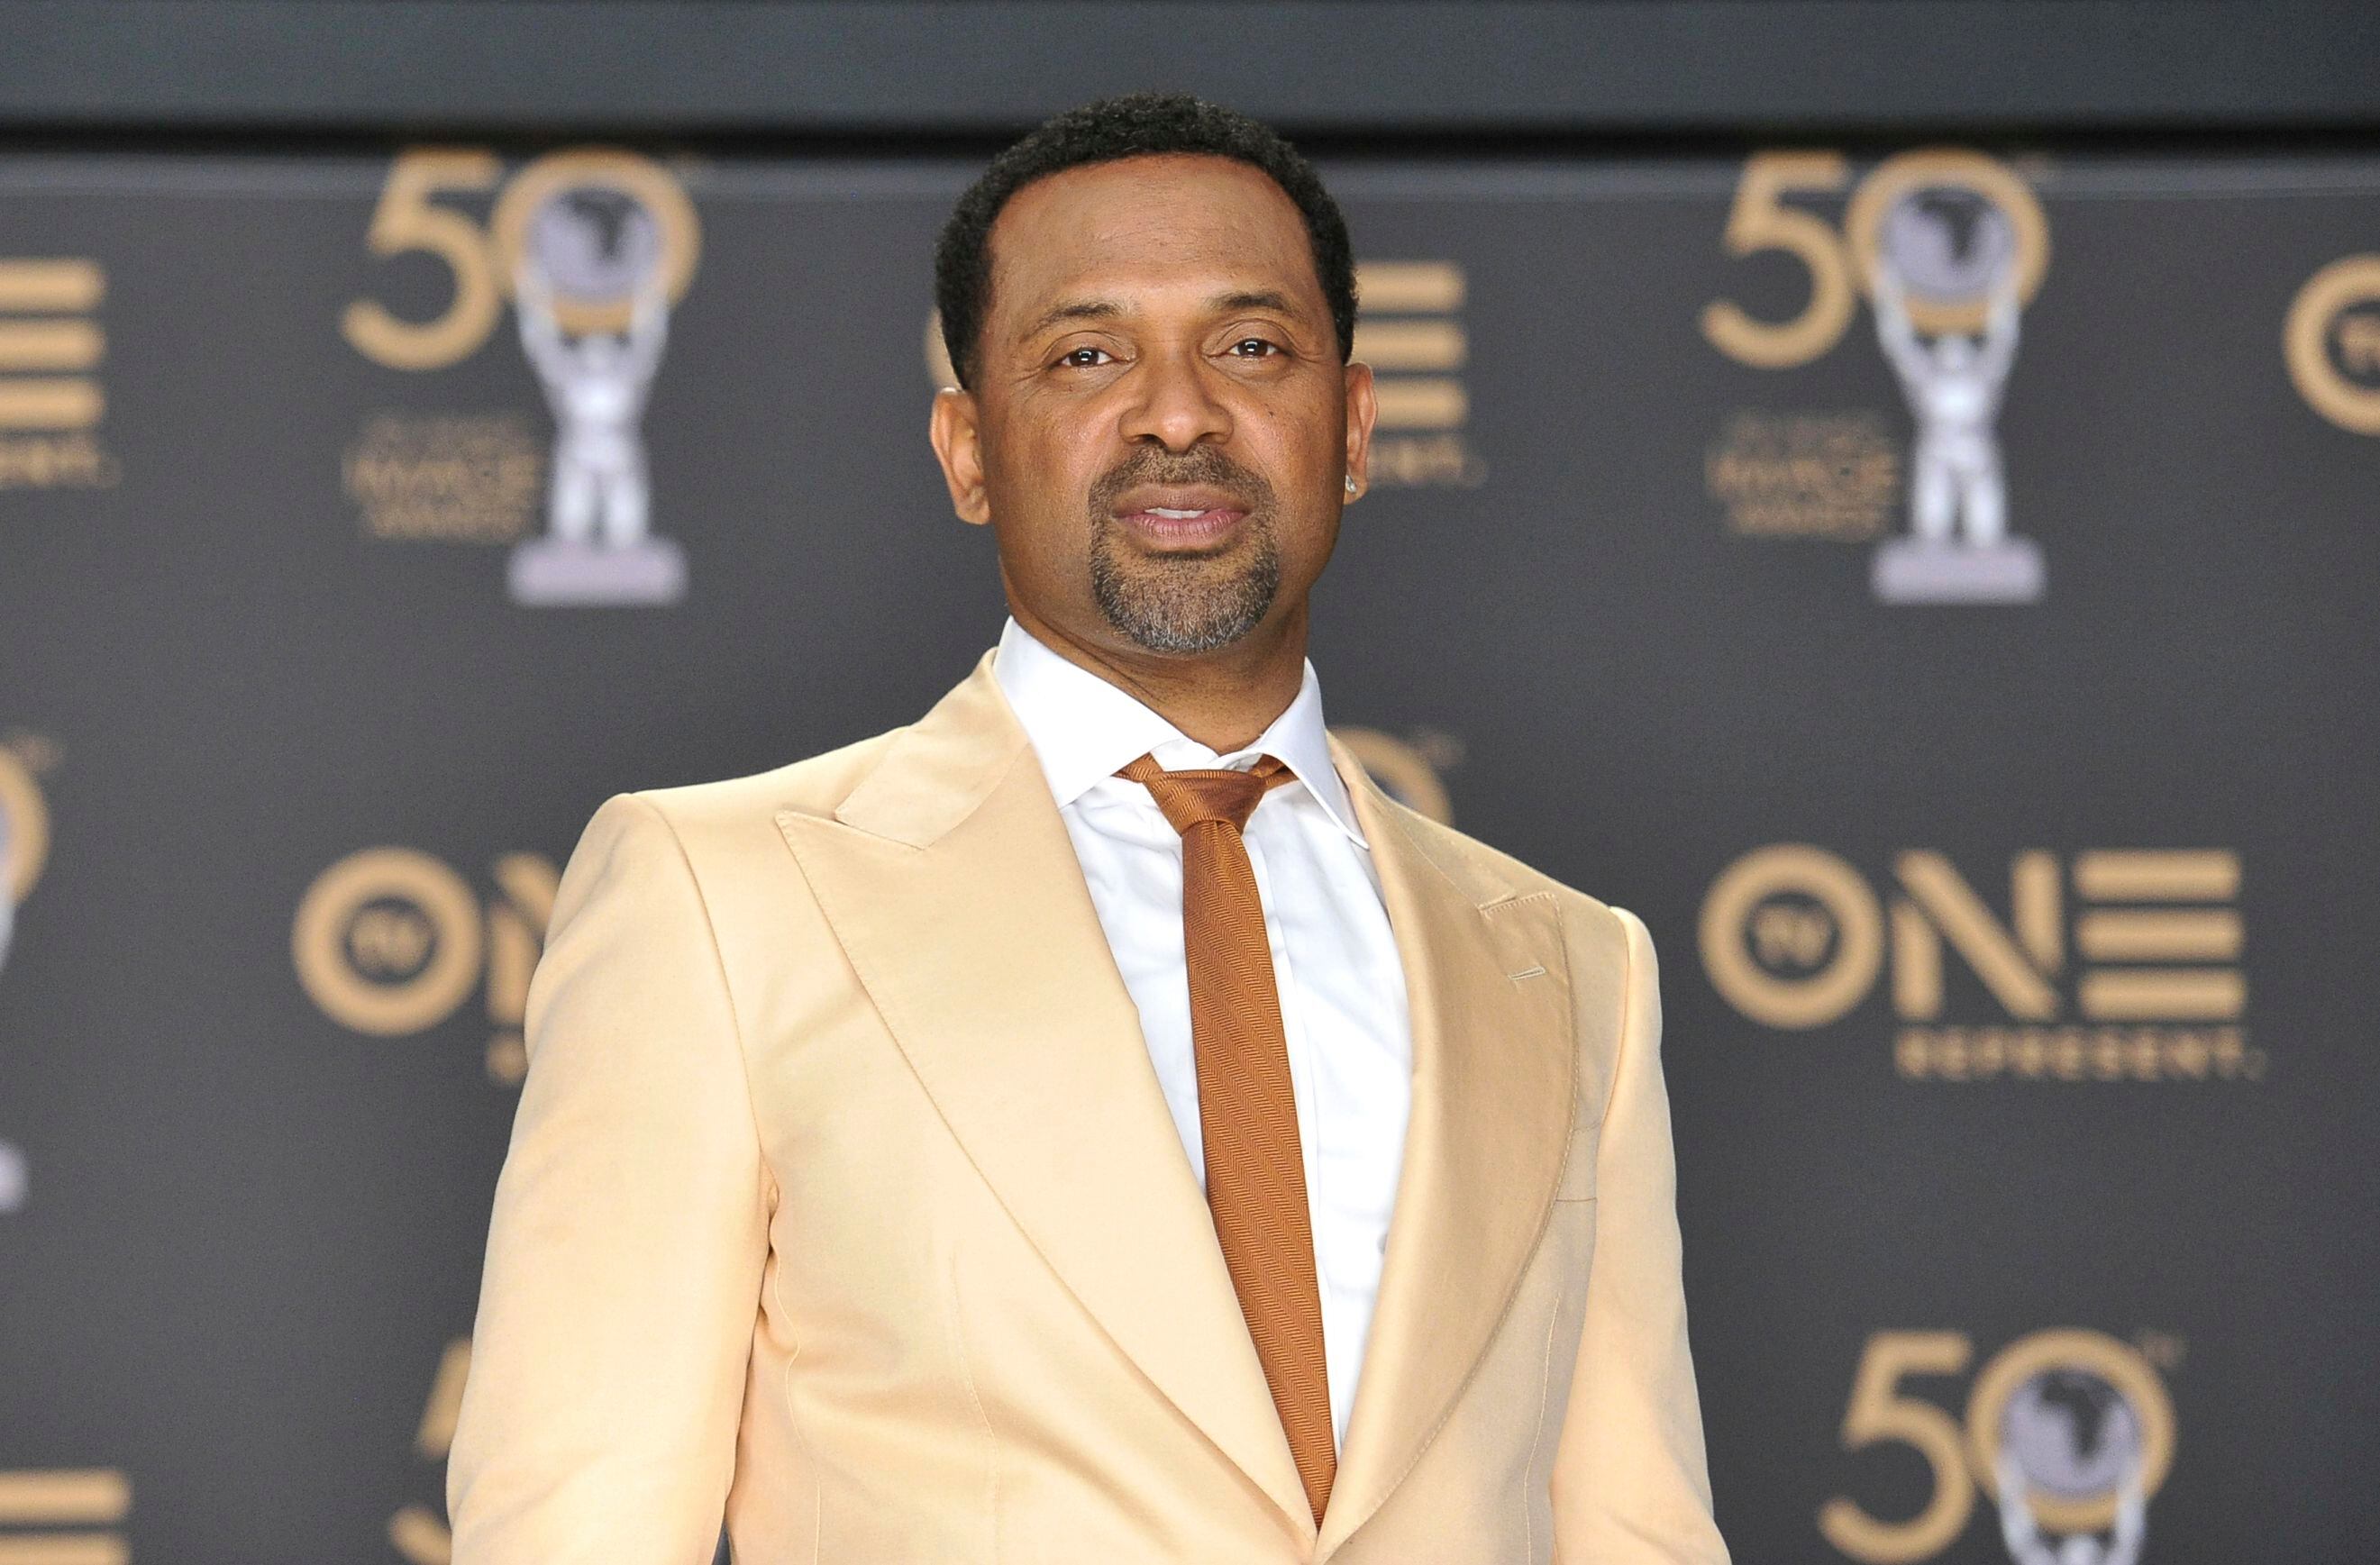 TSA agents seize gun from actor Mike Epps in Indianapolis